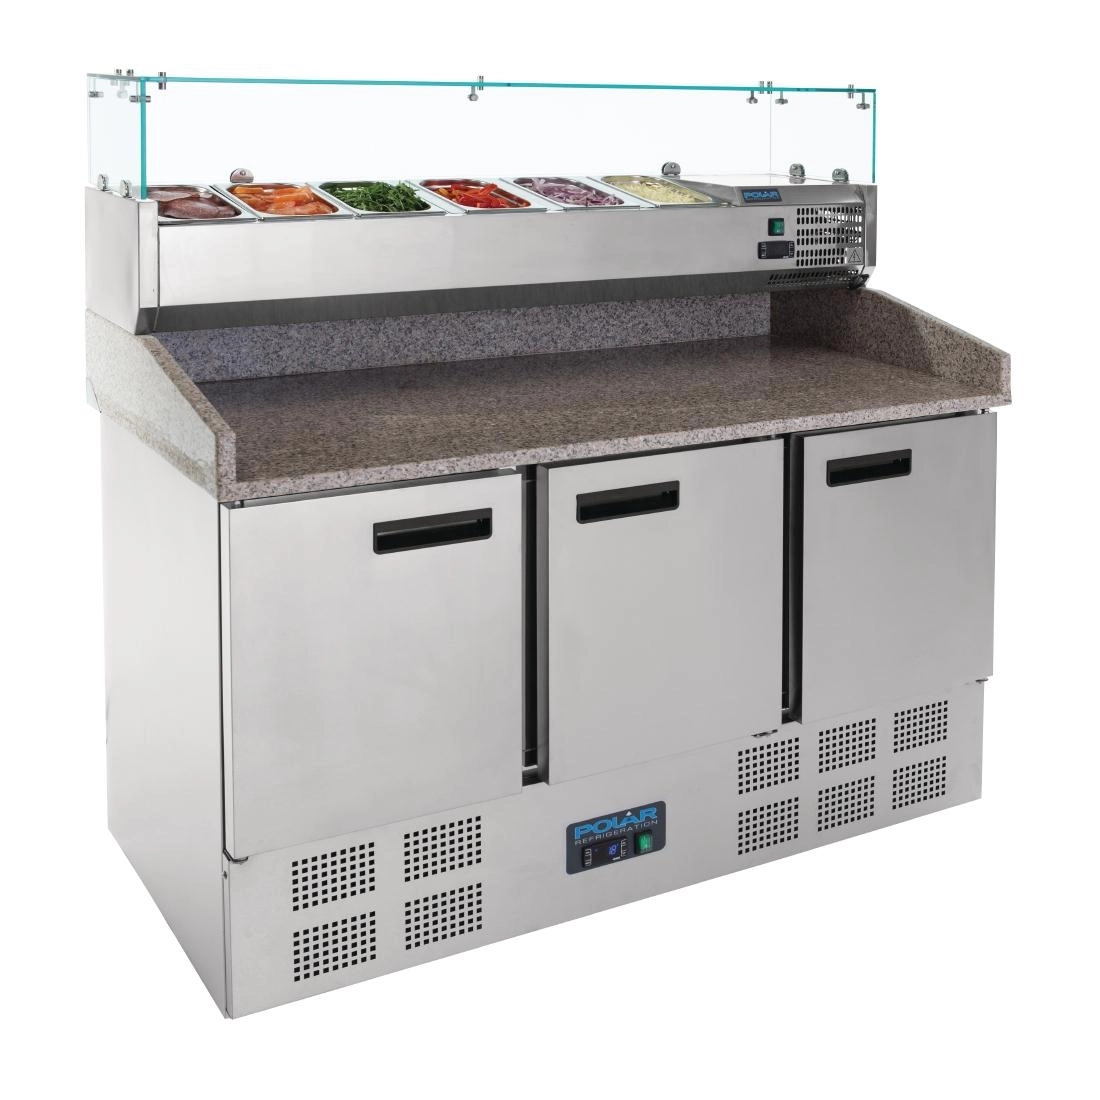 Polar Refrigerated Pizza and Salad Prep Counter 368Ltr CN267